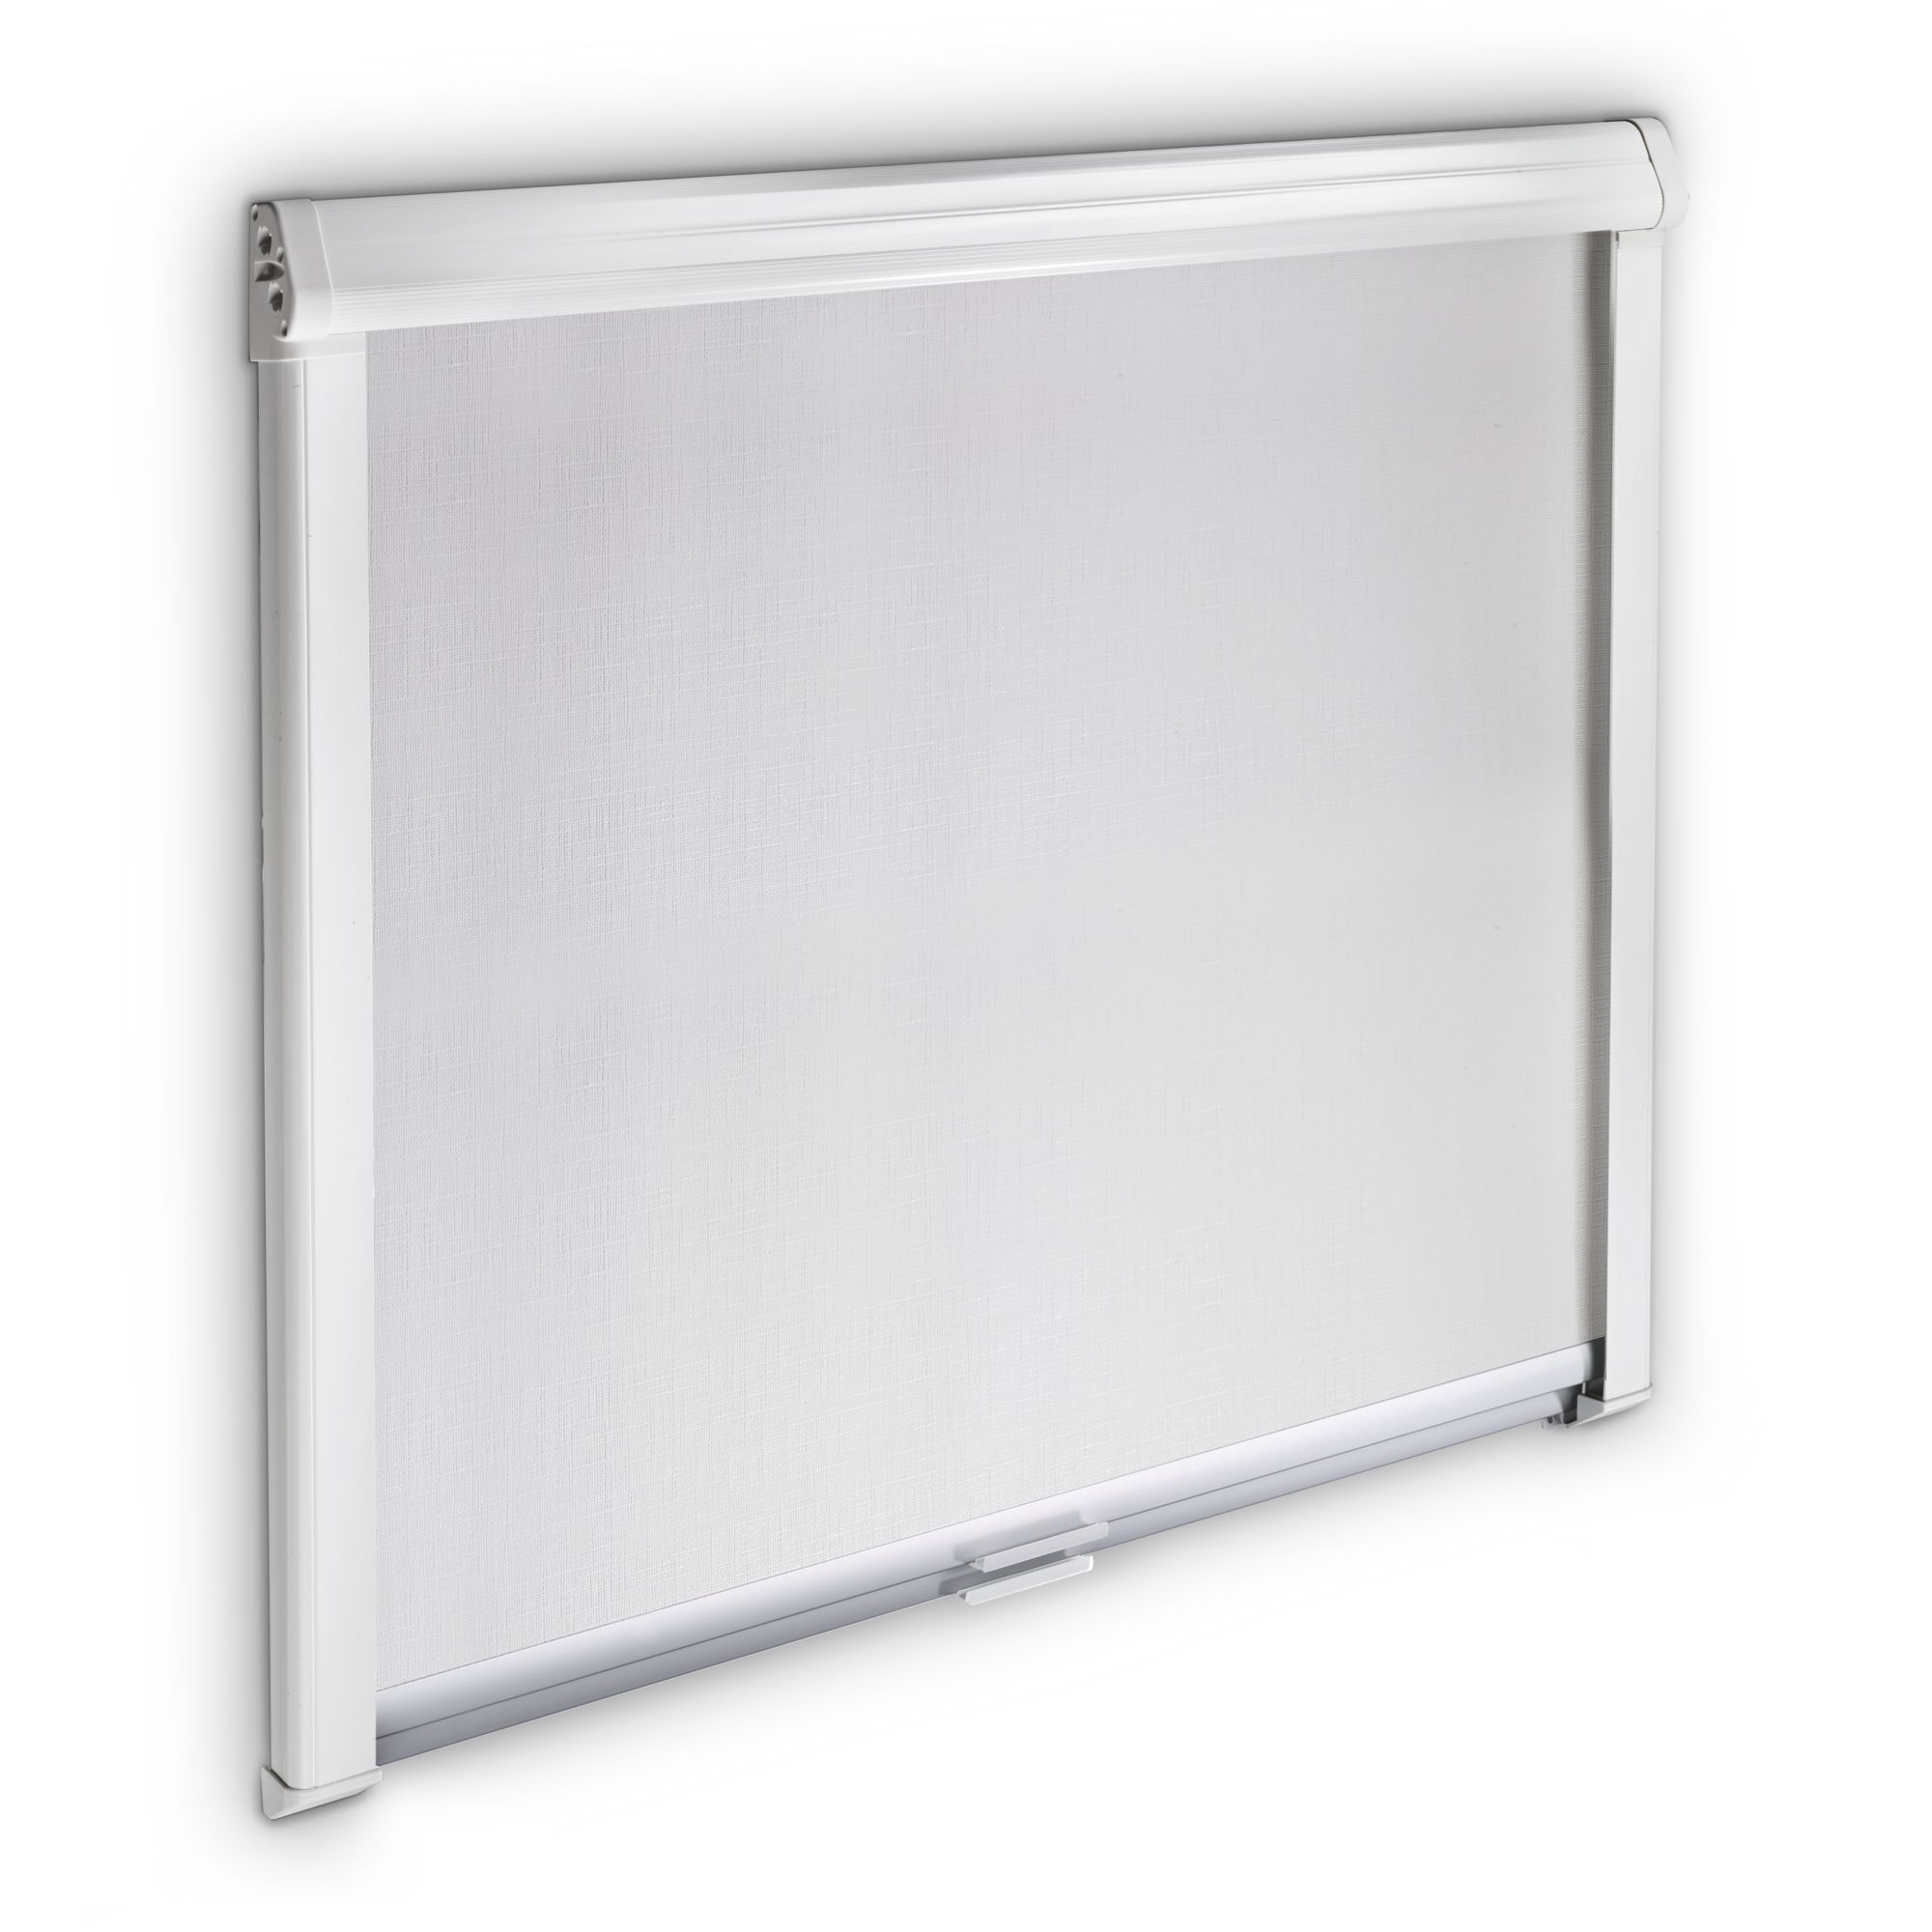 Dometic Black-Out Roller Blind 3000, 1360 x 810 mm, traffic-white